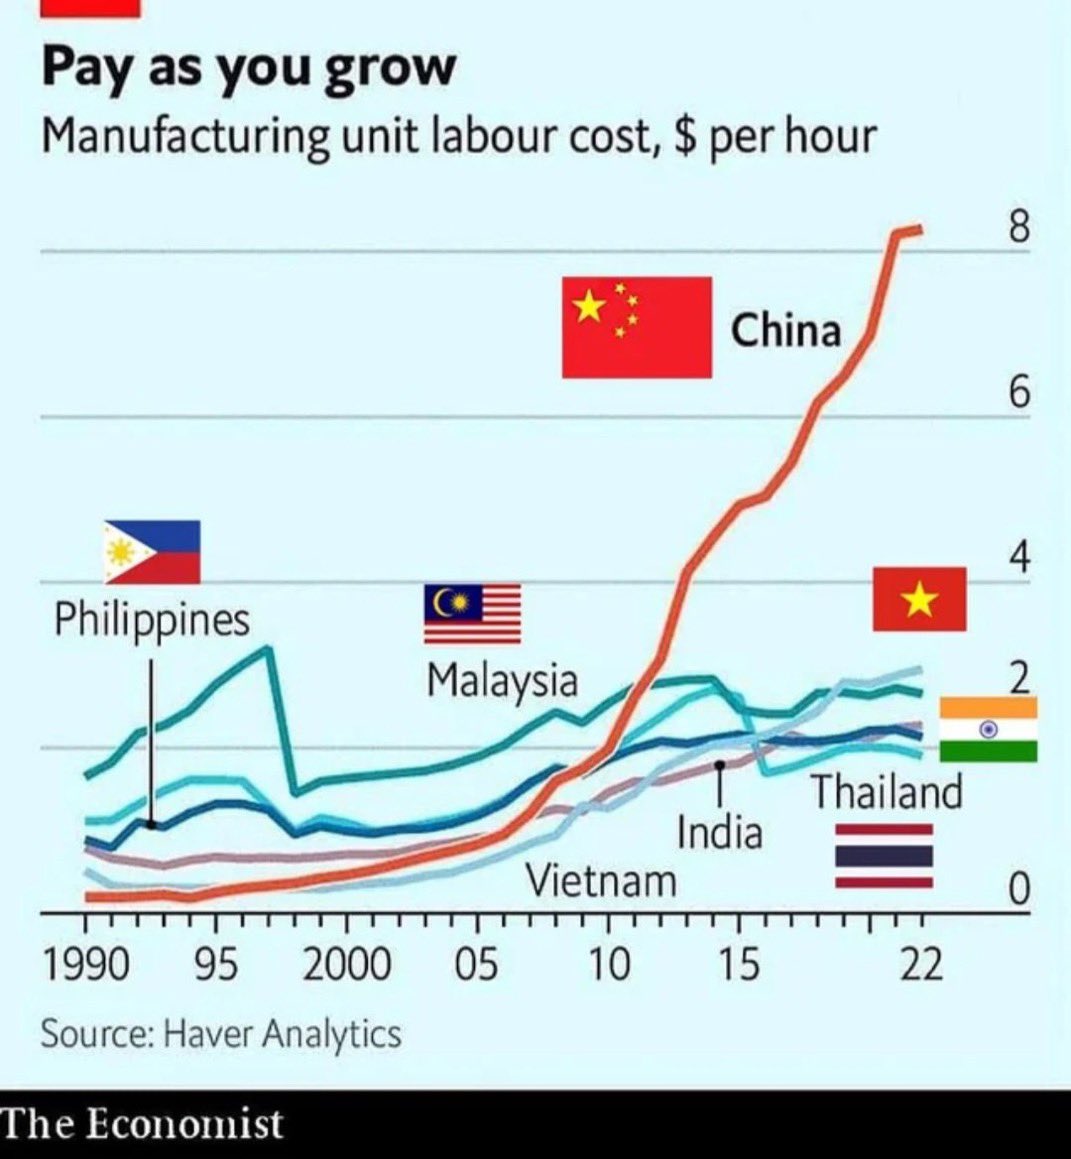 China has higher wages vs other countries, yet its manufacturing output is higher vs several cheap labor countries combined. Apple and Tesla aren’t in China for 'cheap labor' but for uniquely skilled talent, integrated supply chain networks, advanced manufacturing capabilities.